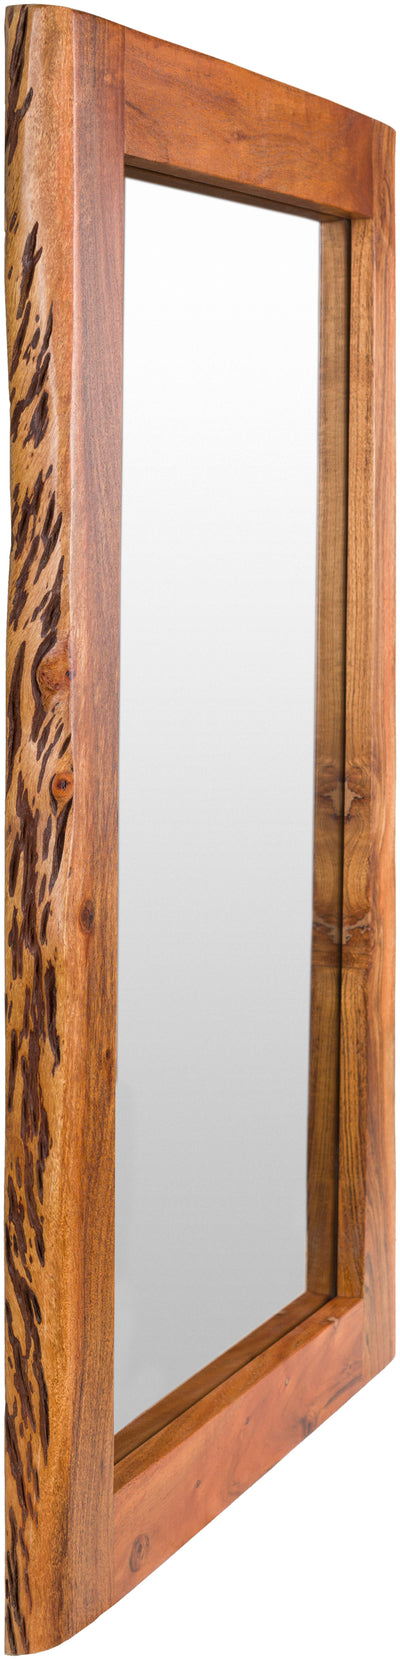 product image for Edge DGE-100 Rectangular Mirror by Surya 89